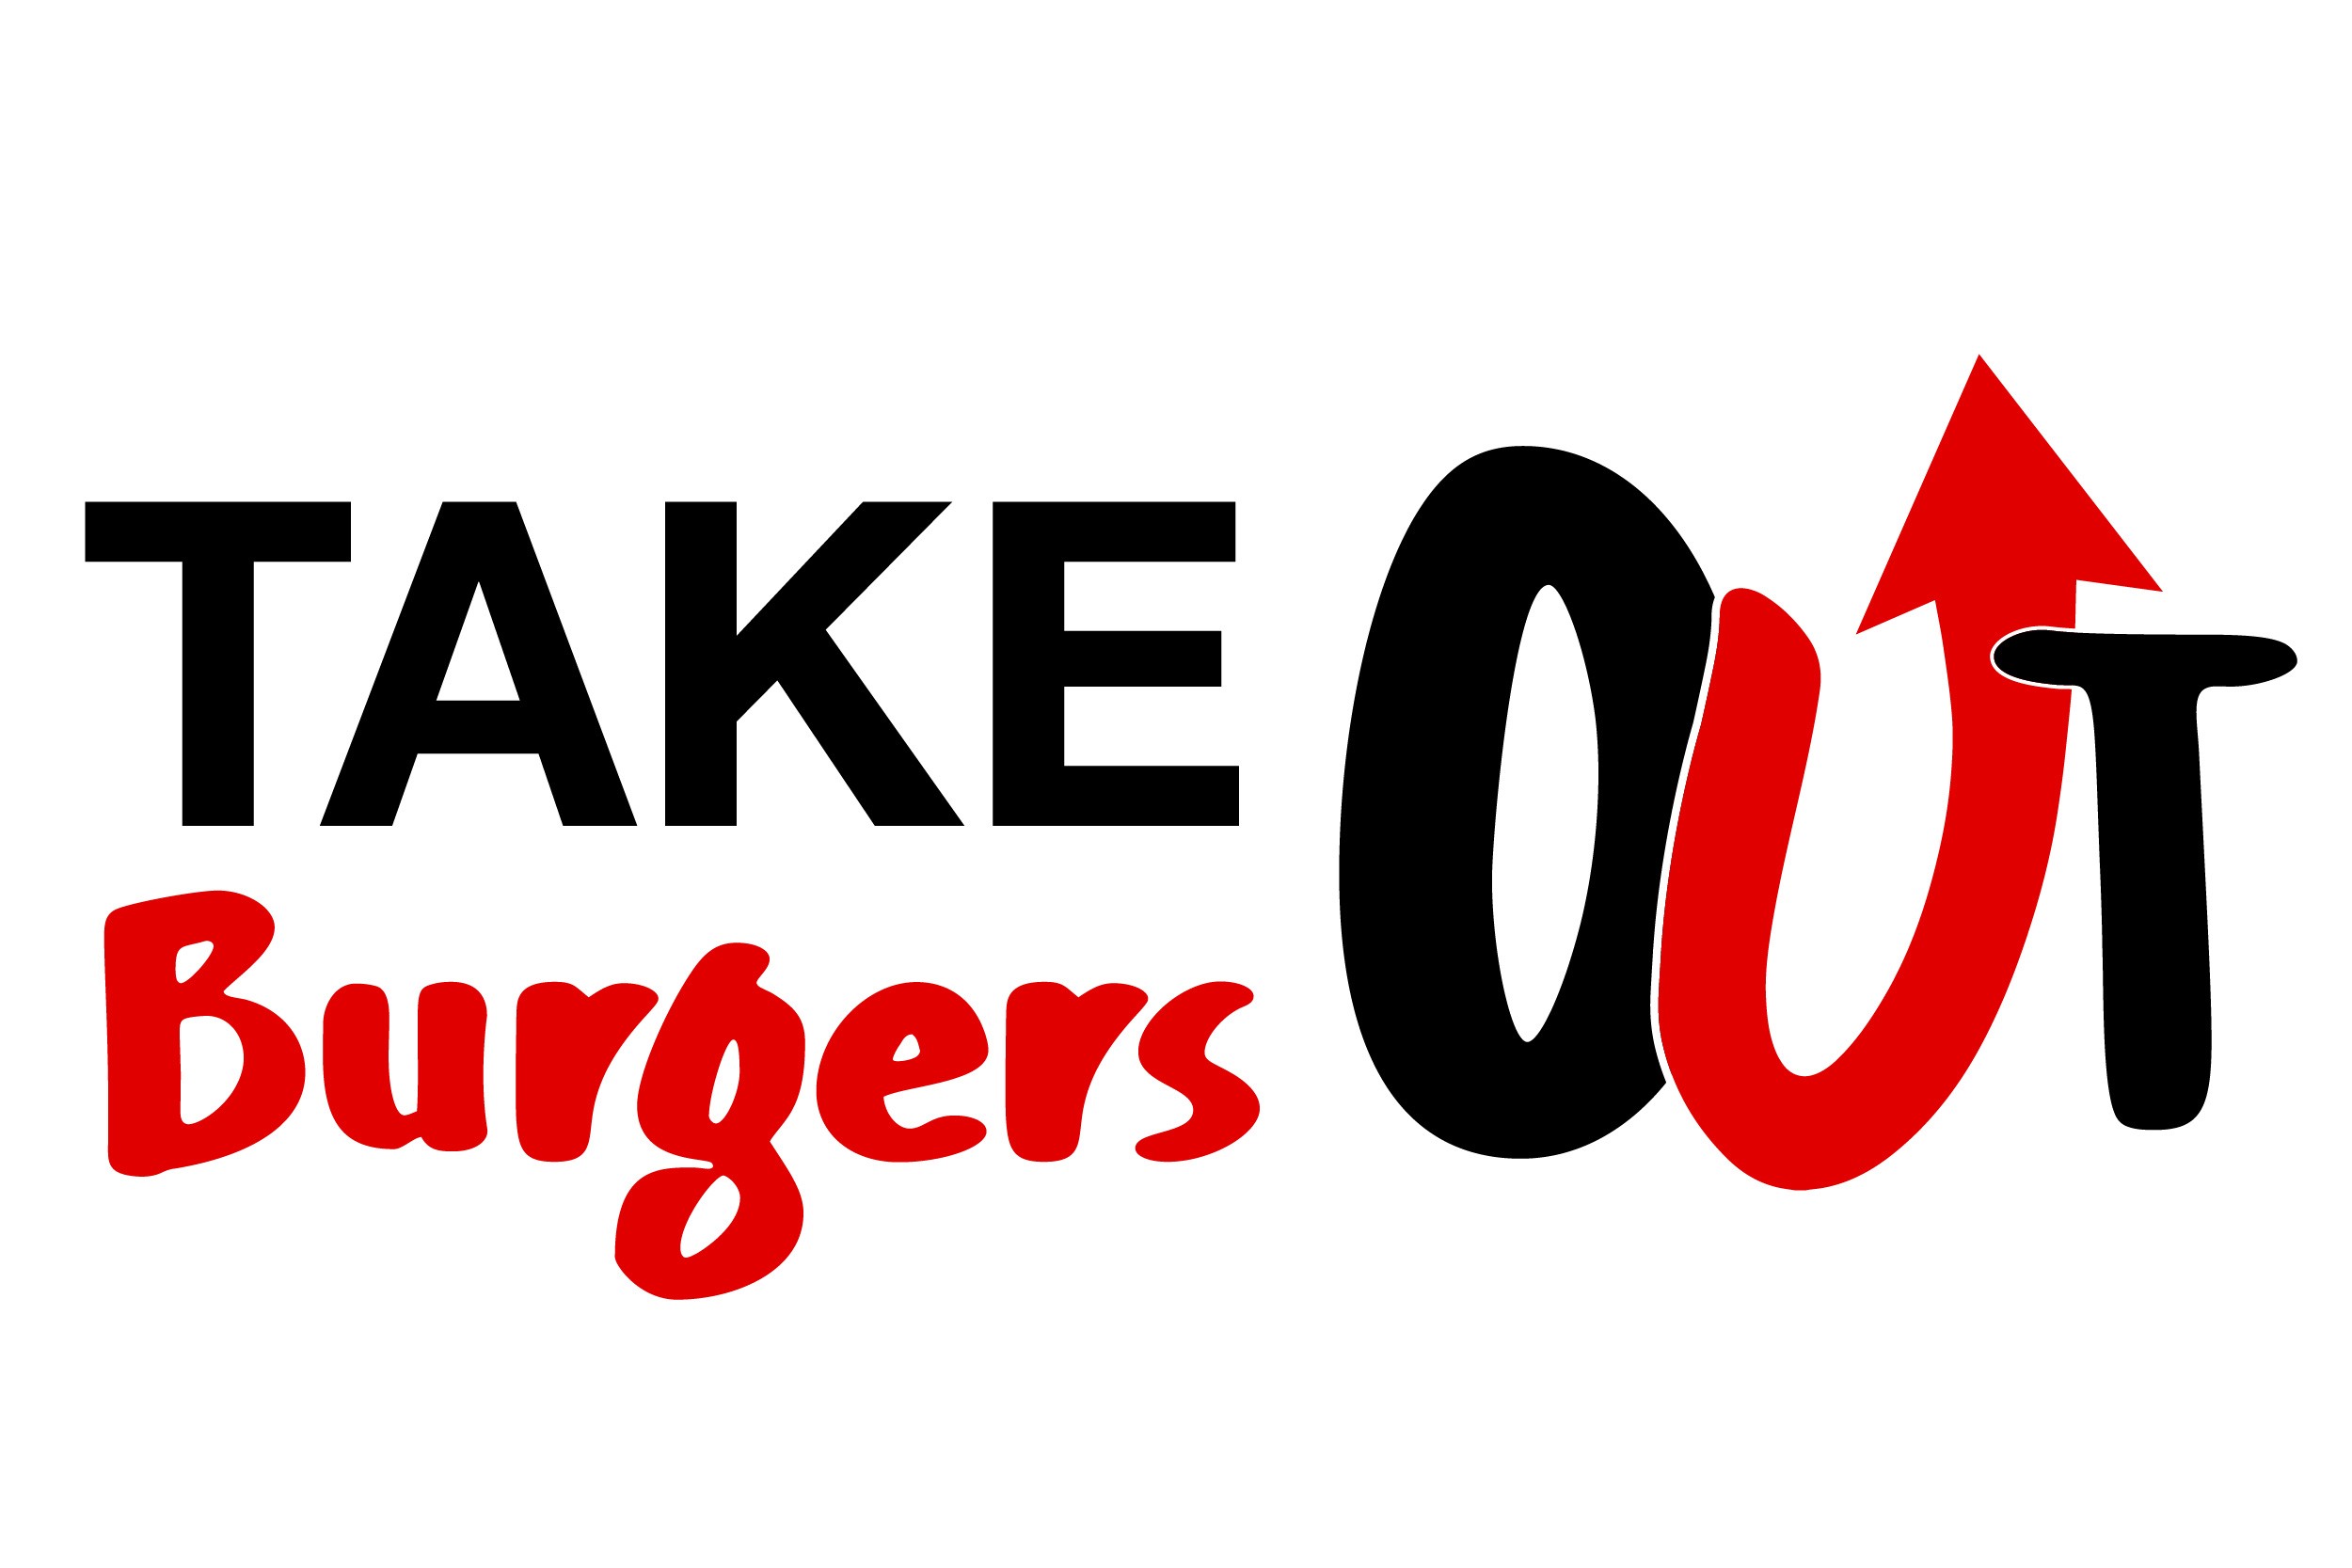 TAKE OUT BURGERS We are located by Tom Thumb, Facing Wheatland Road next to Credit Union